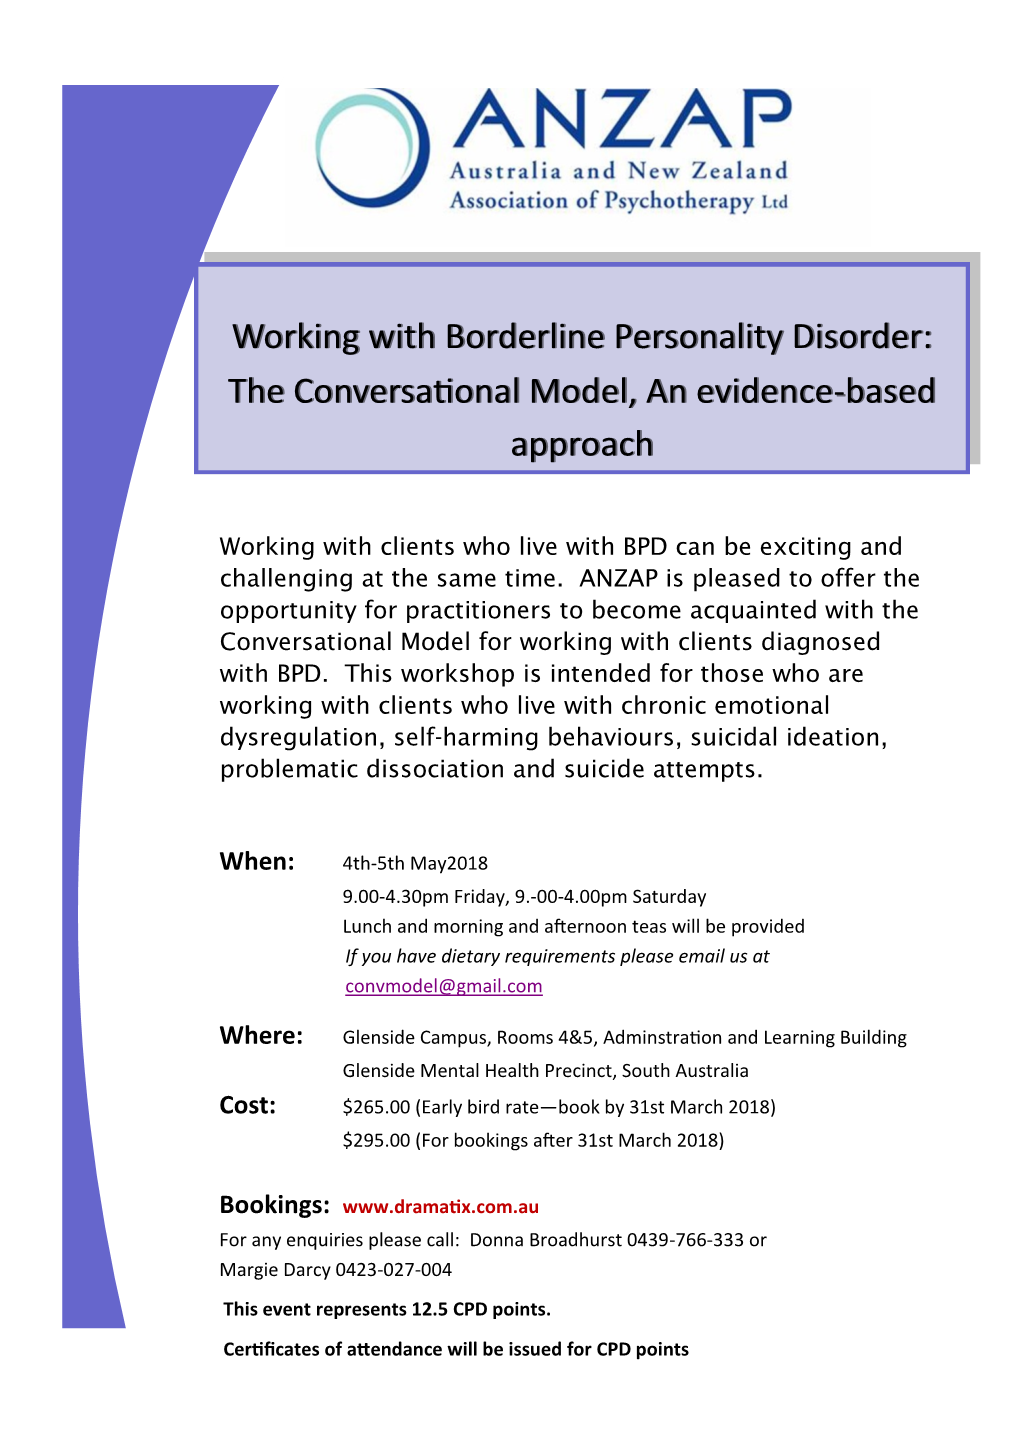 Working with Borderline Personality Disorder: the Conversational